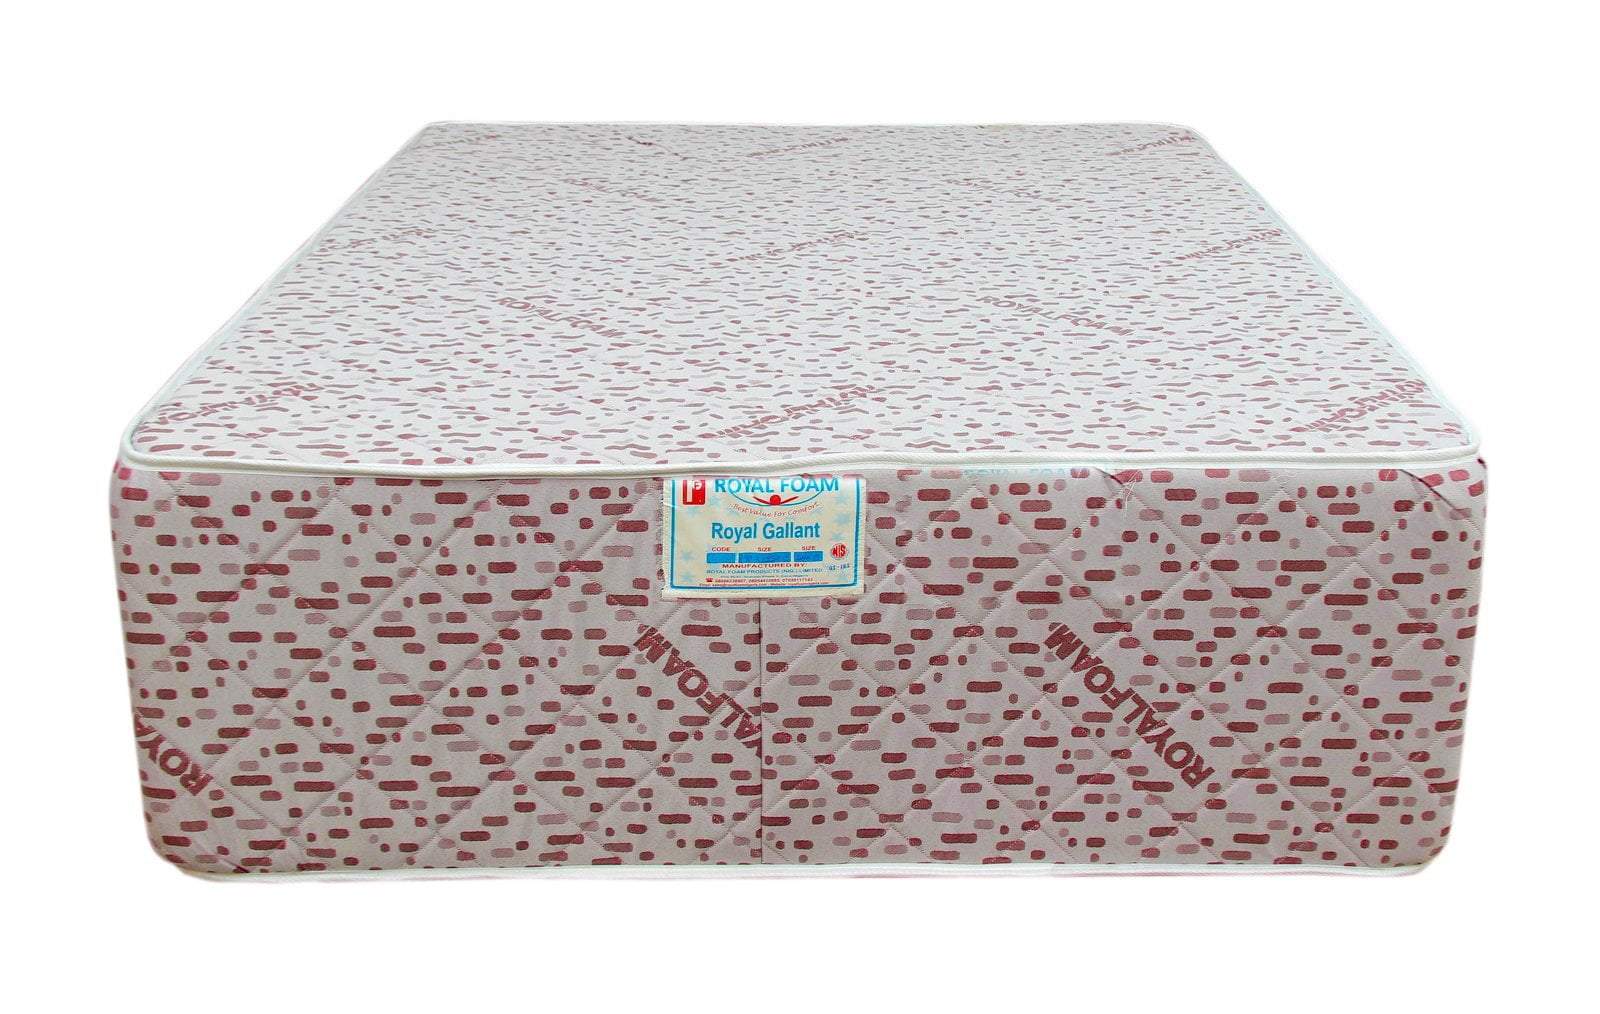 Royal Gallant Plus JACQUARD fabric-Fully Quilted Mattress 190 X 210 X 20 CM(6ft x 7ft x 8inches) 2 Adult( King Size)(Lagos Only)